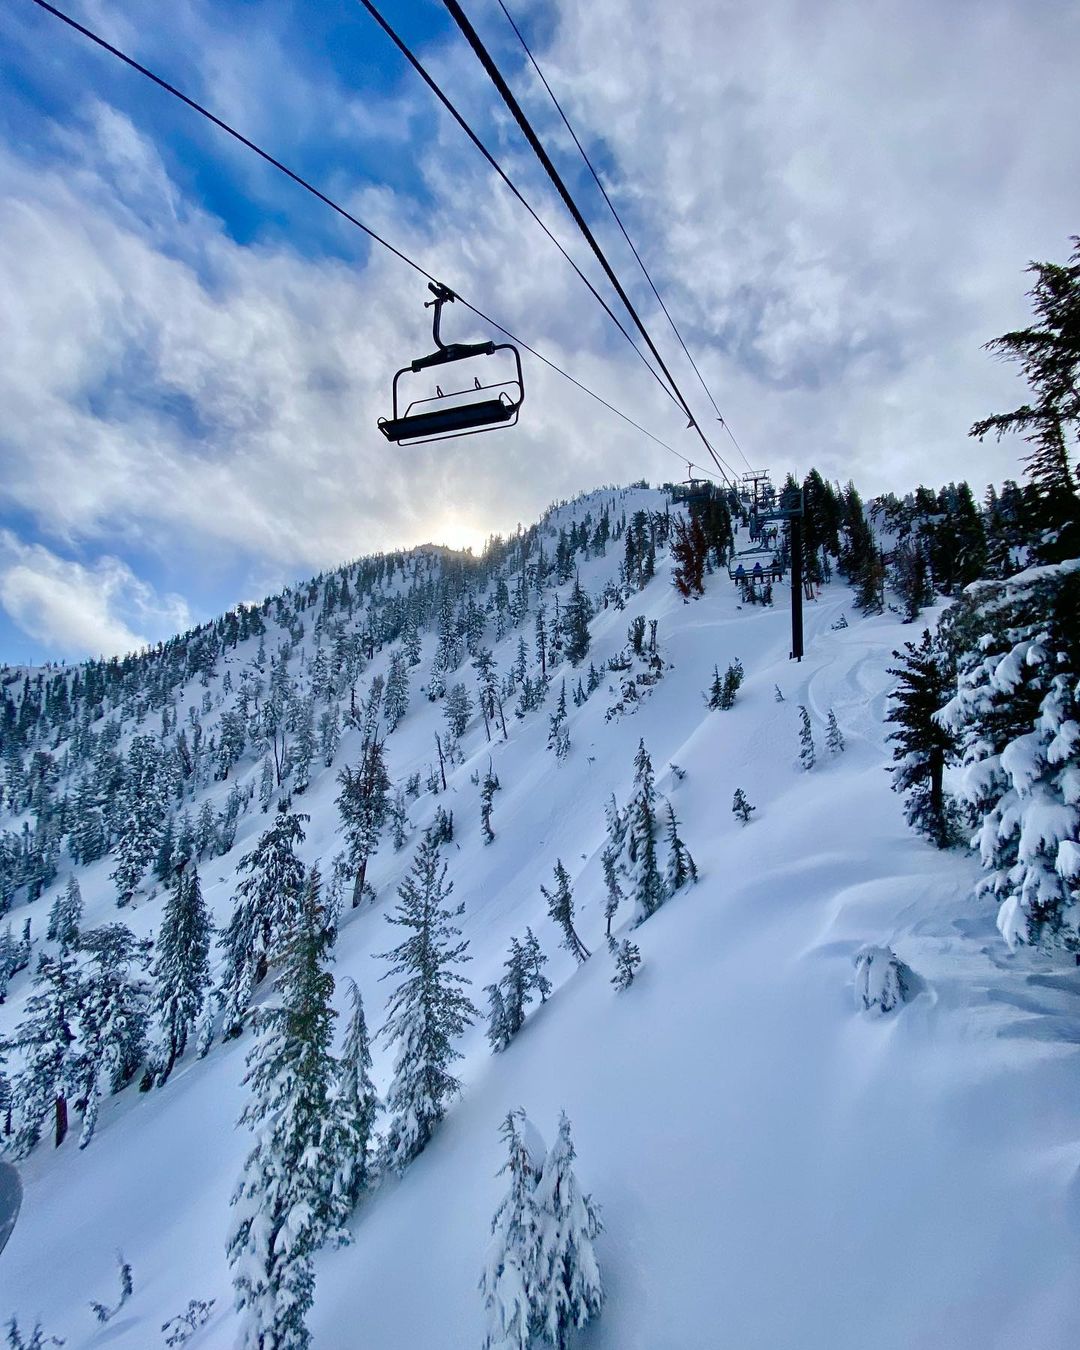 Free shuttle for Palisades Tahoe, Olympic Valley & Alpine Meadows